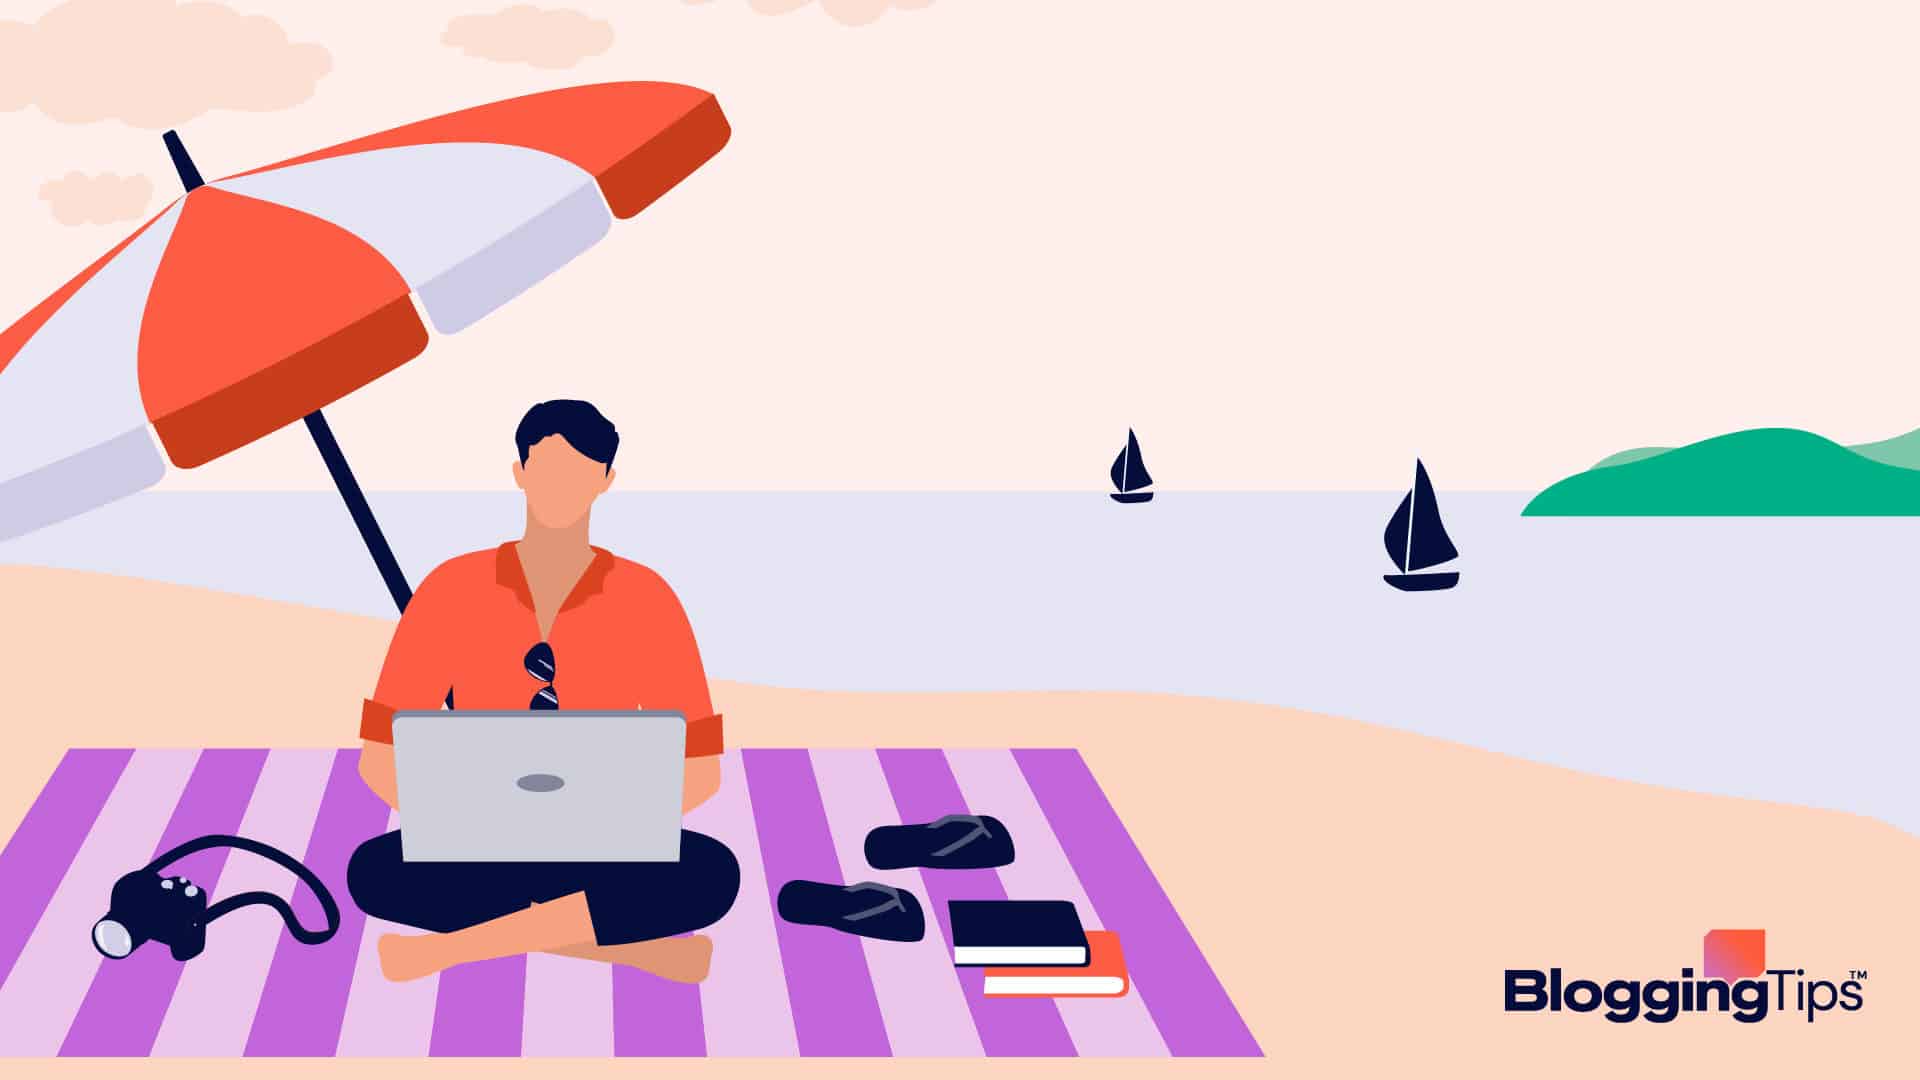 vector graphic showing an illustration of travel writer jobs